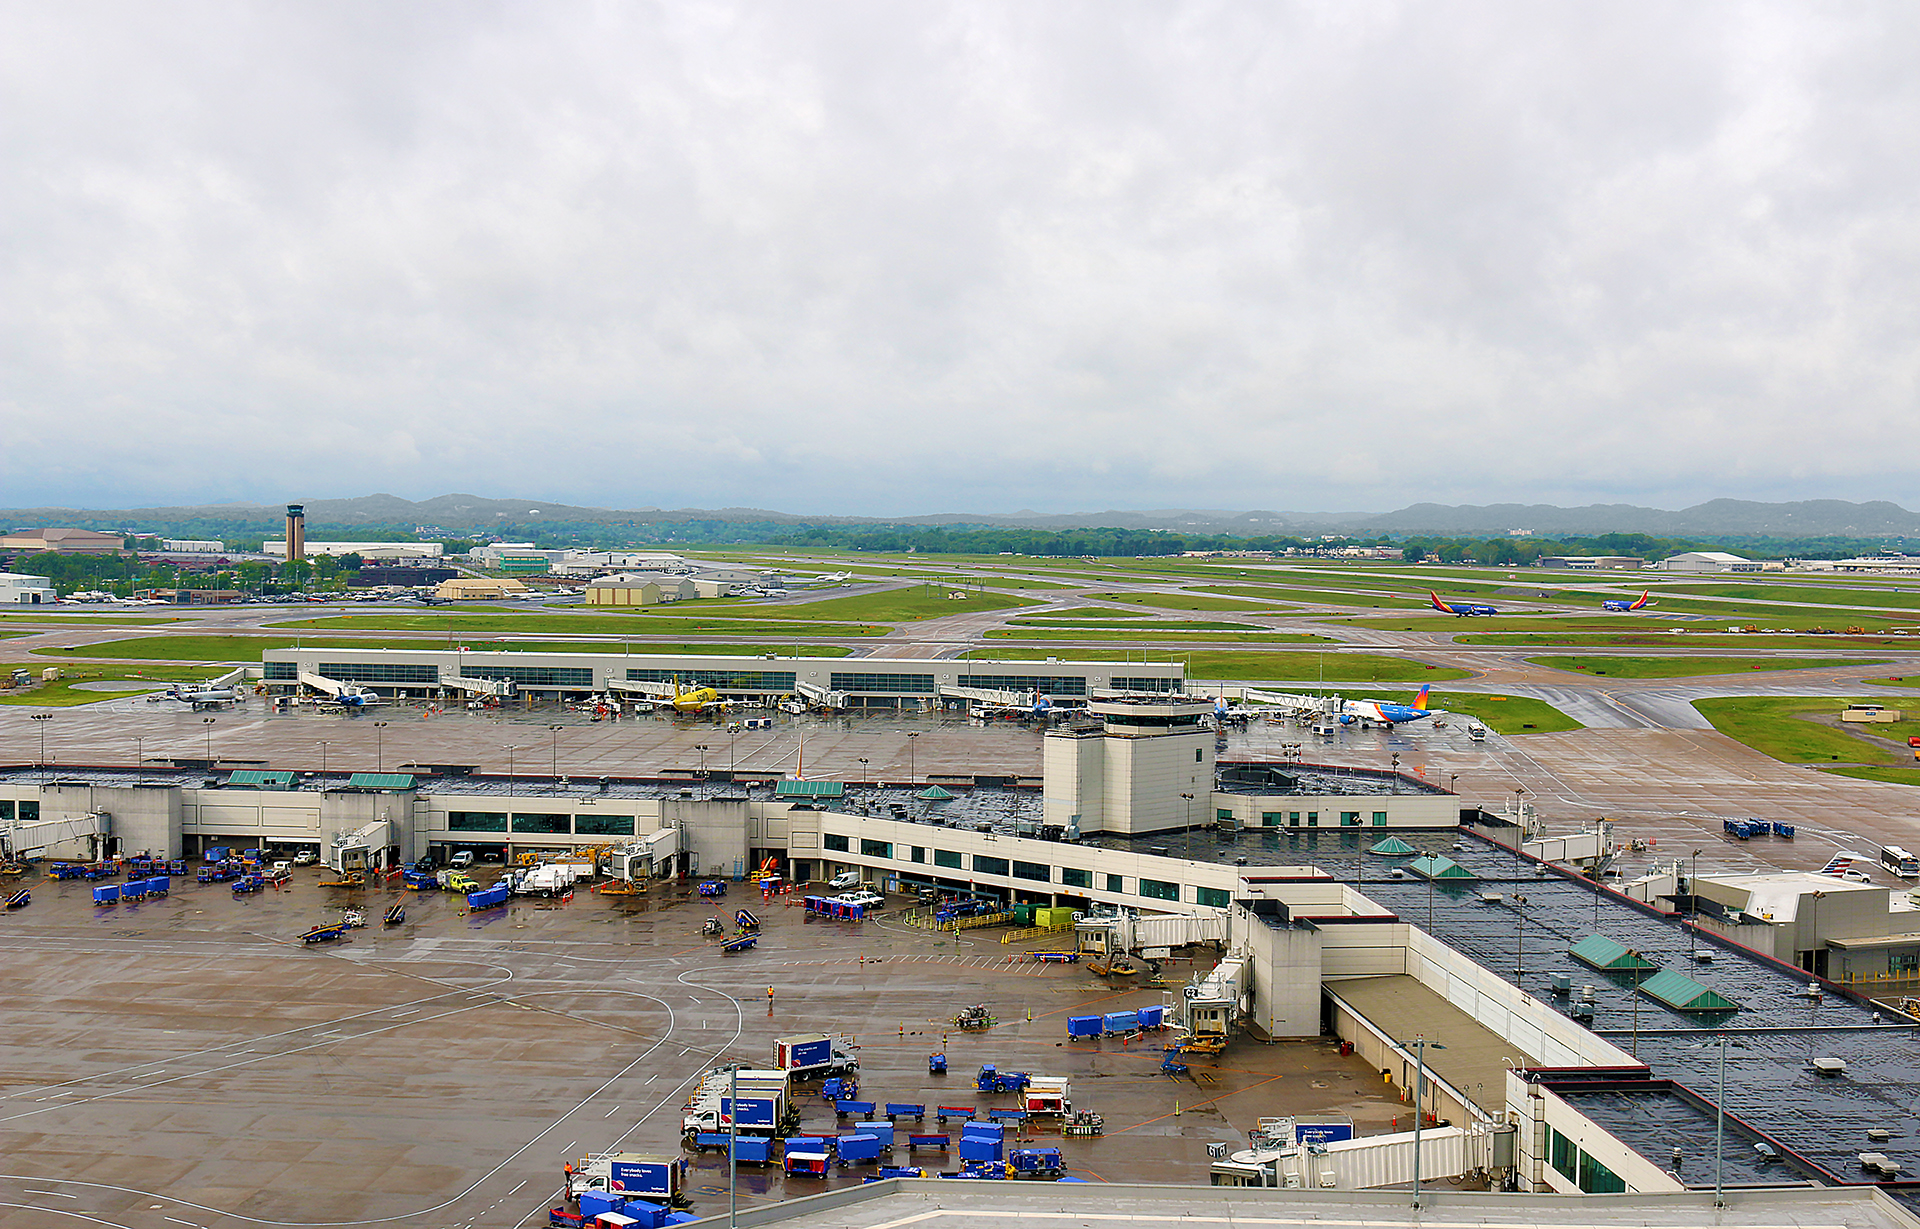 an airport with many vehicles parked on the ground